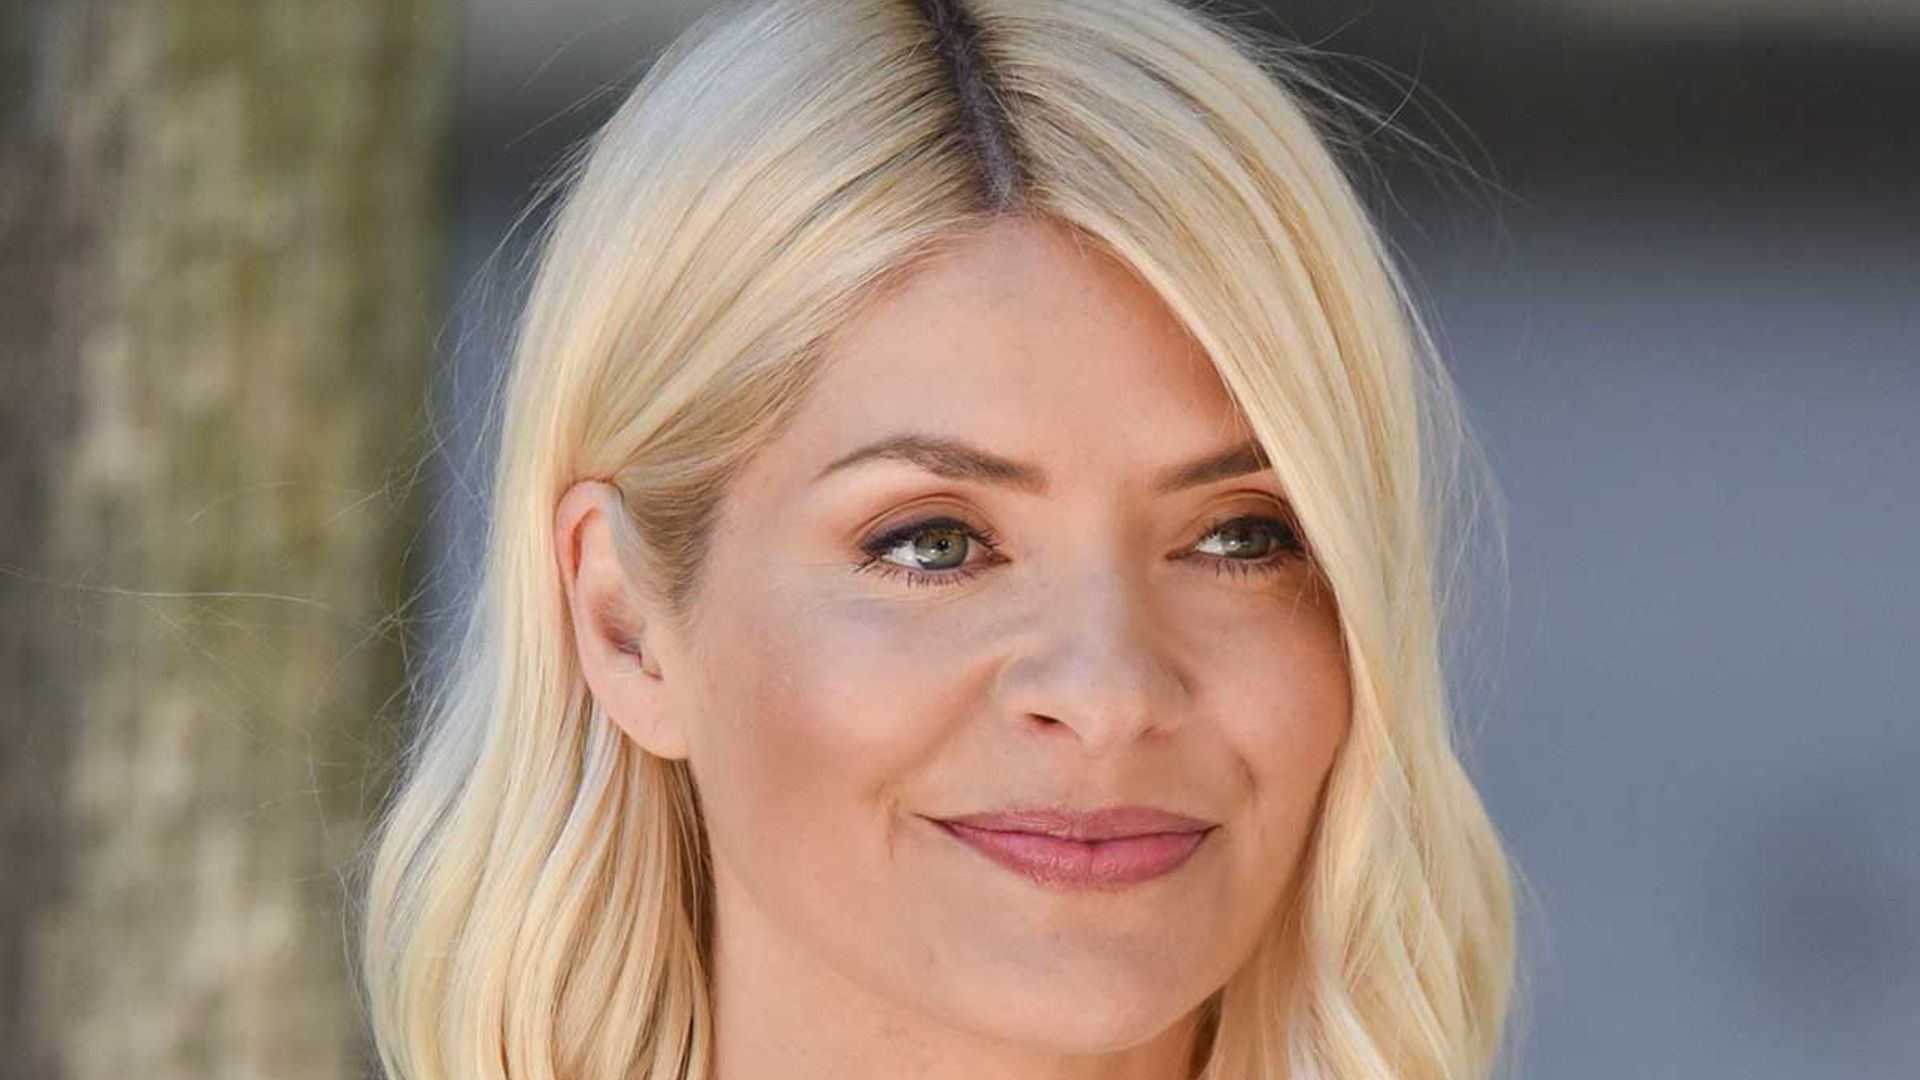 Holly Willoughby breaks social media silence amid Phillip Schofield's devastated interviews